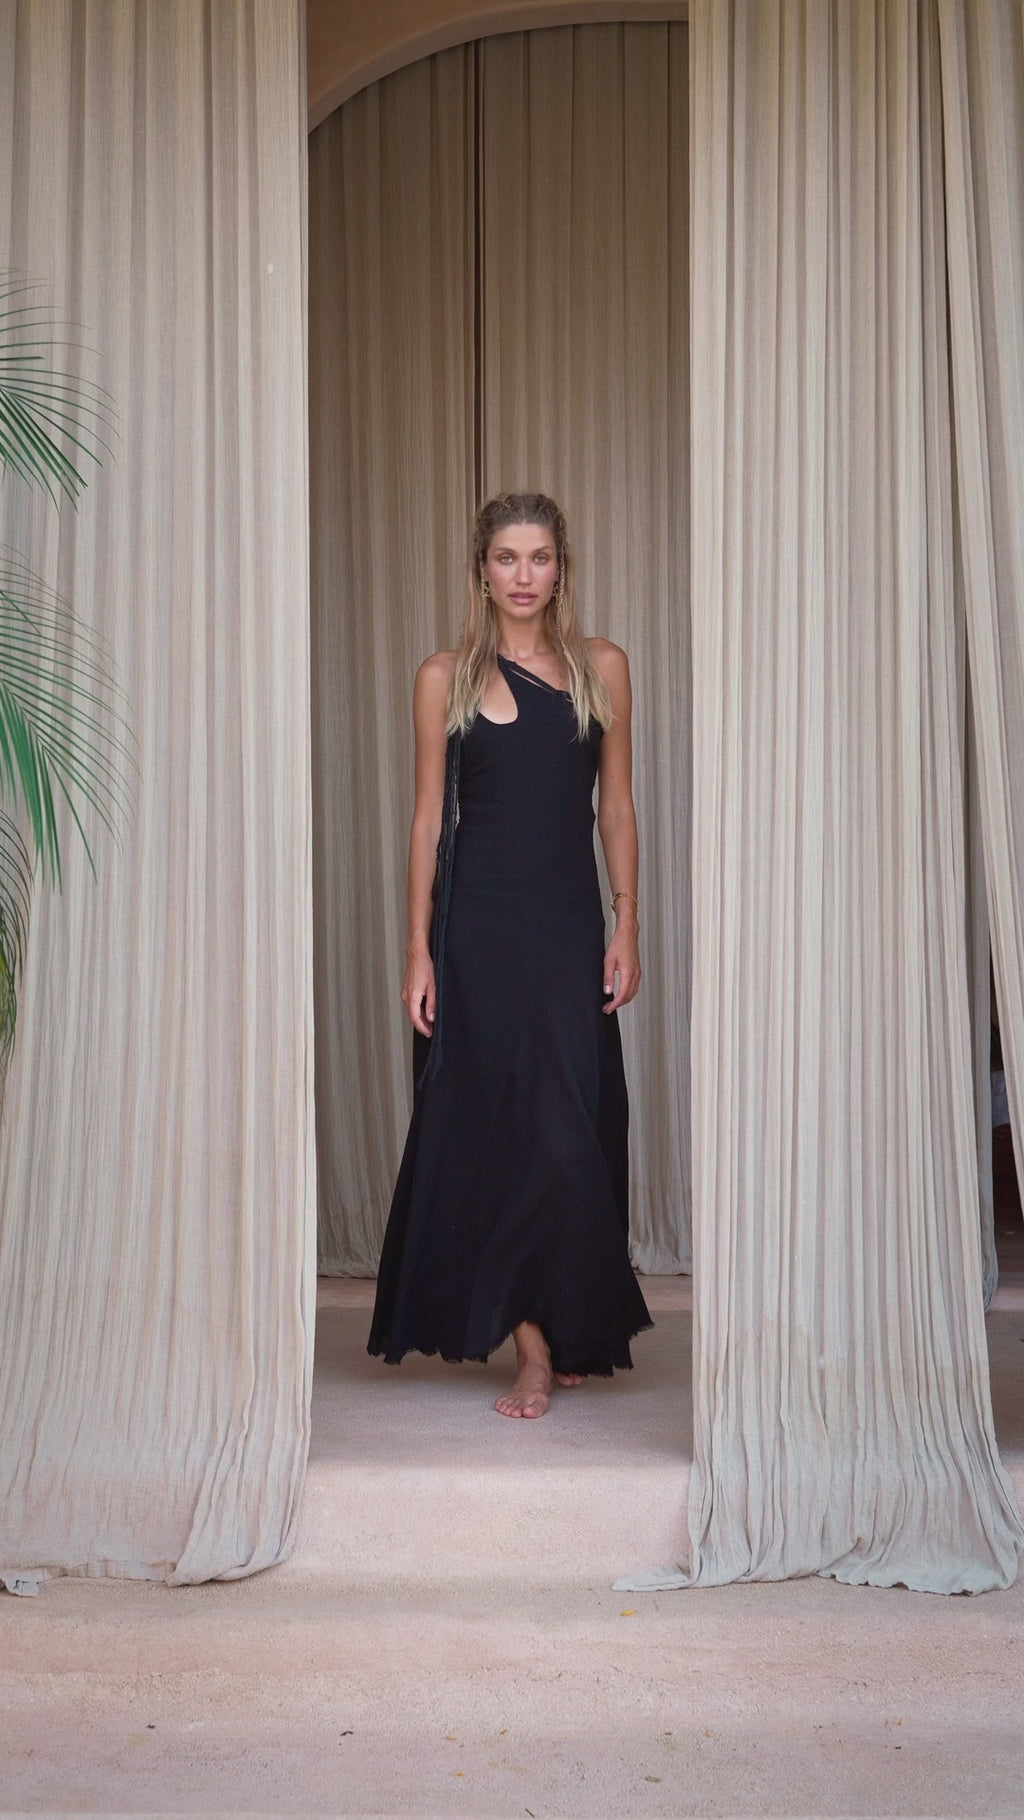 Update Your Wardrobe with the Latest from Aya Sacred Wear - Black Open Side Dress